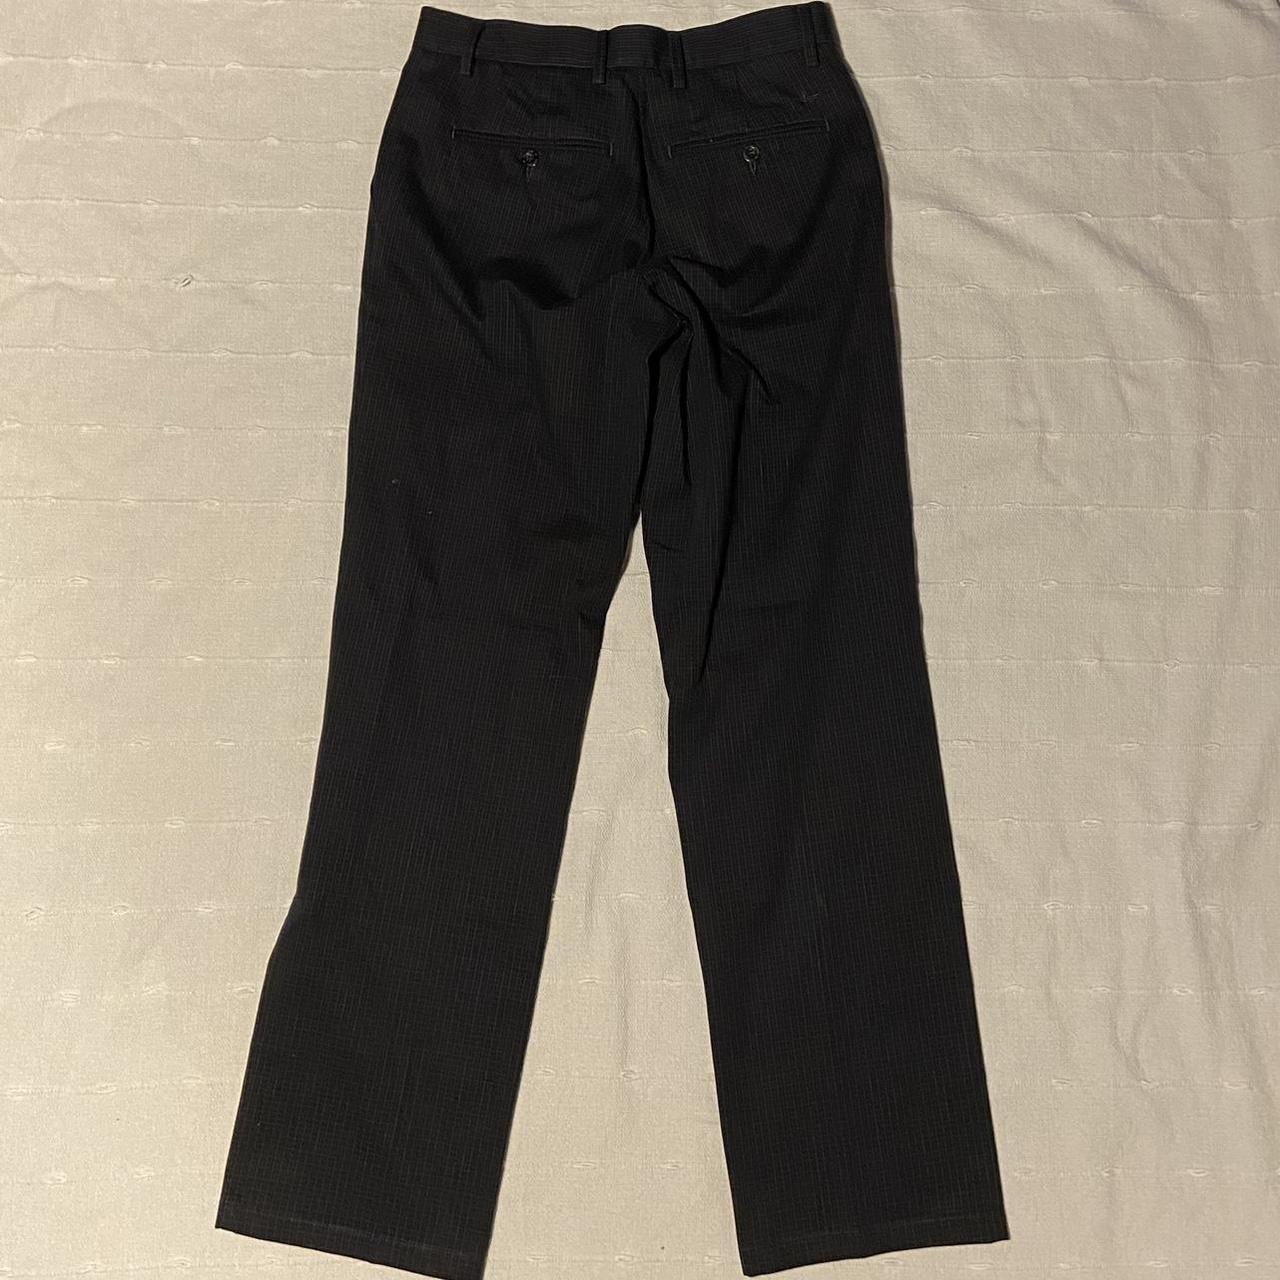 Dockers Women's Grey and Black Trousers (3)